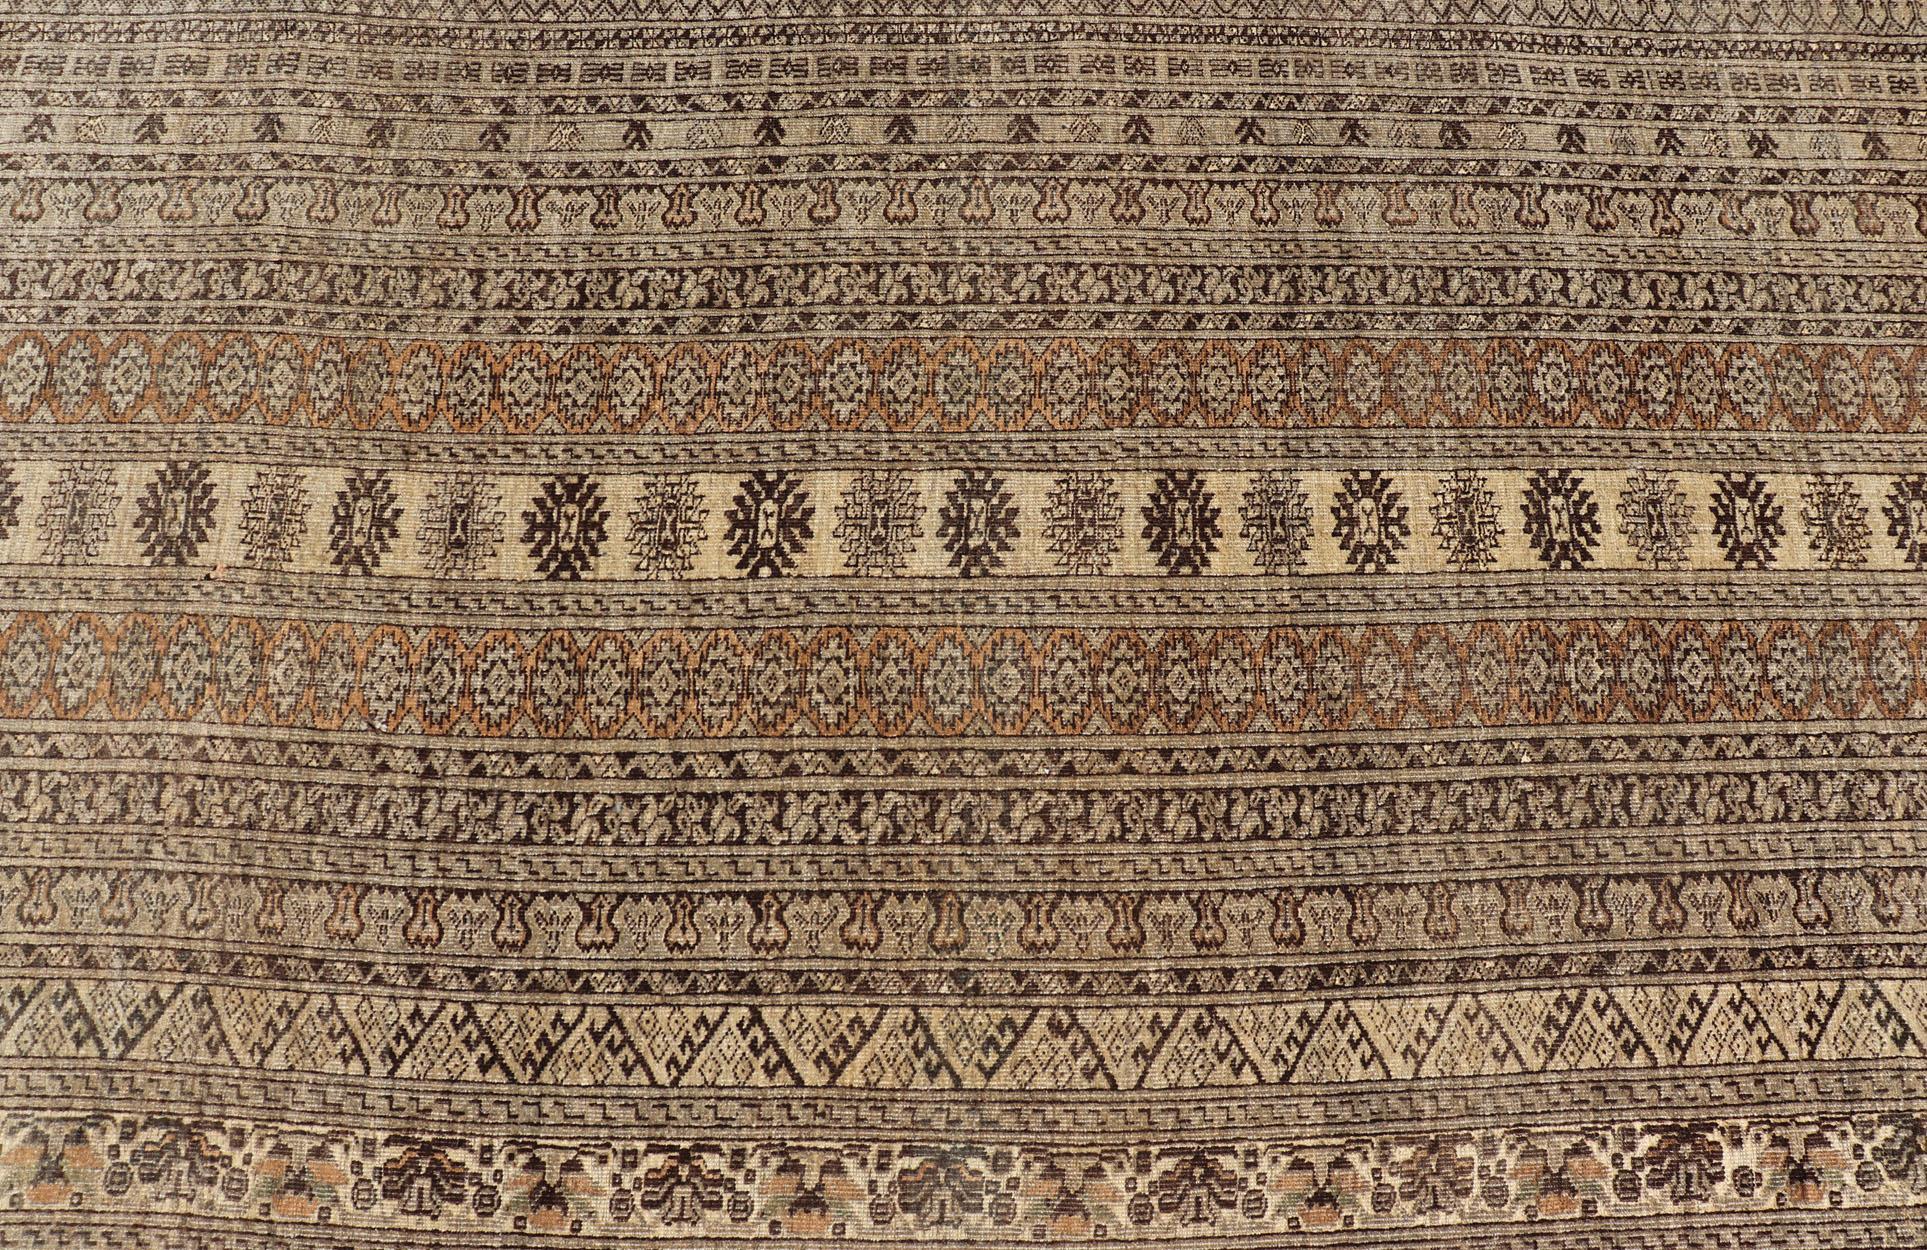 Hand-Knotted Turkomen Ersari Rug in Wool with All-Over Tribal Beluch Design For Sale 4